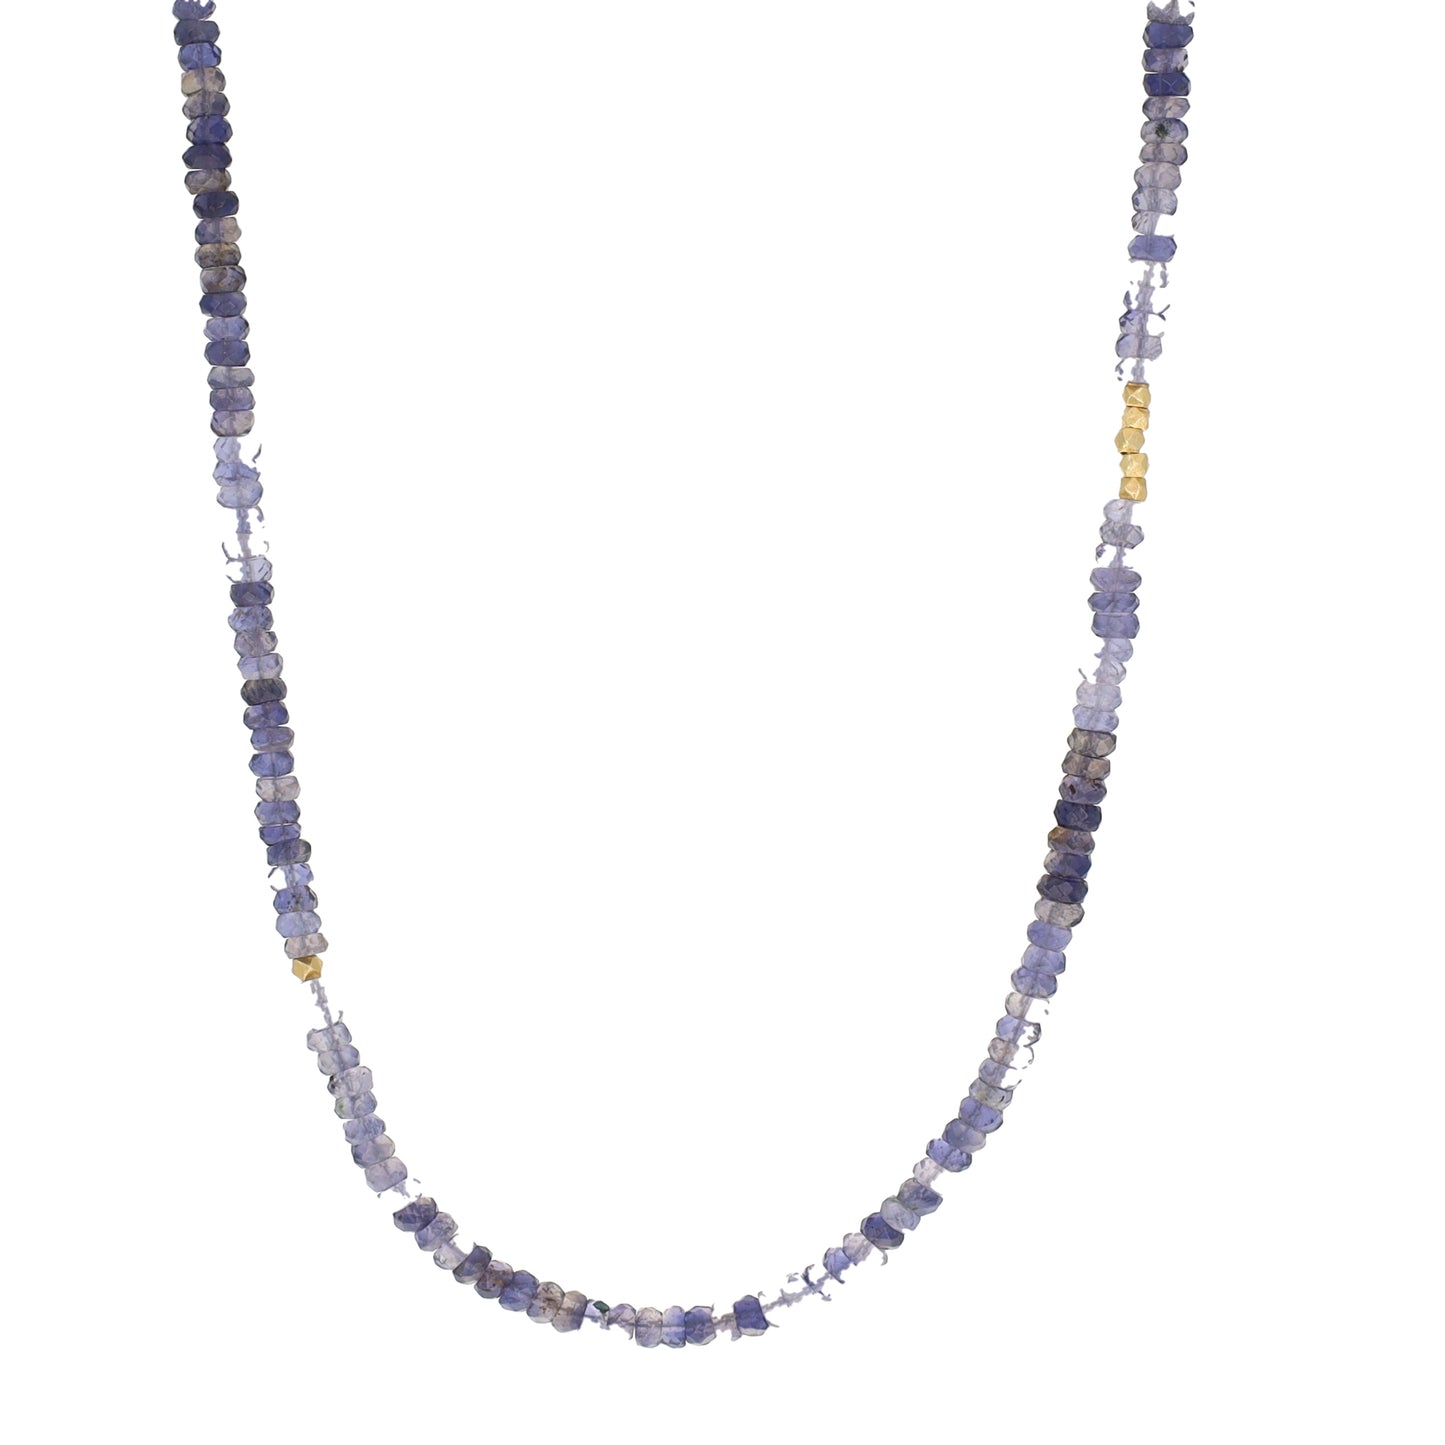 Tanzanite Necklace with gold beads